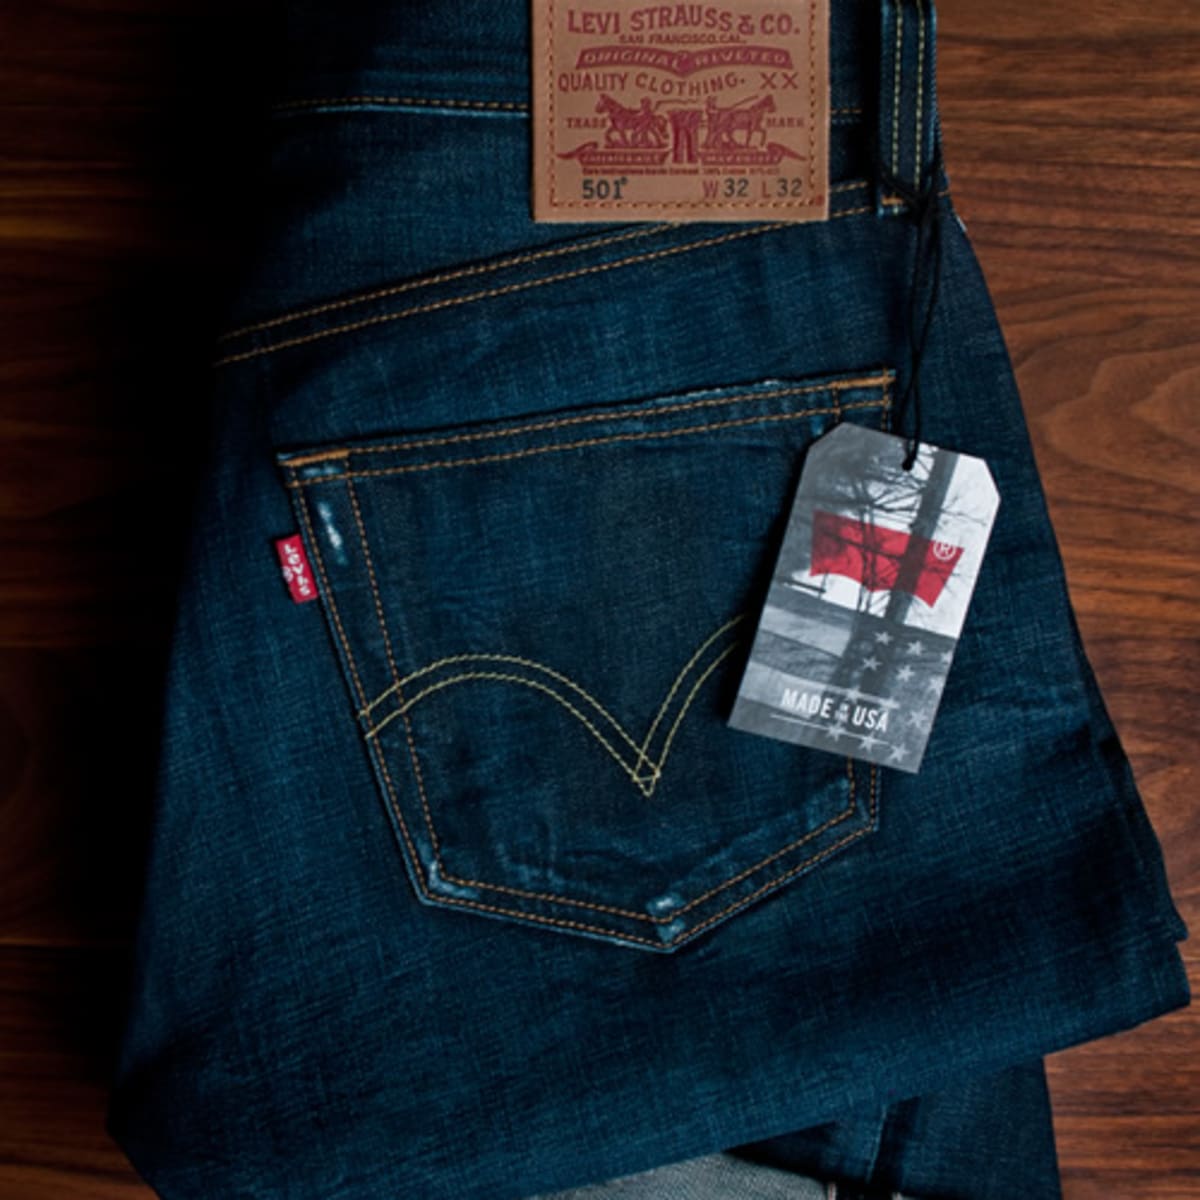 lewis jeans usa